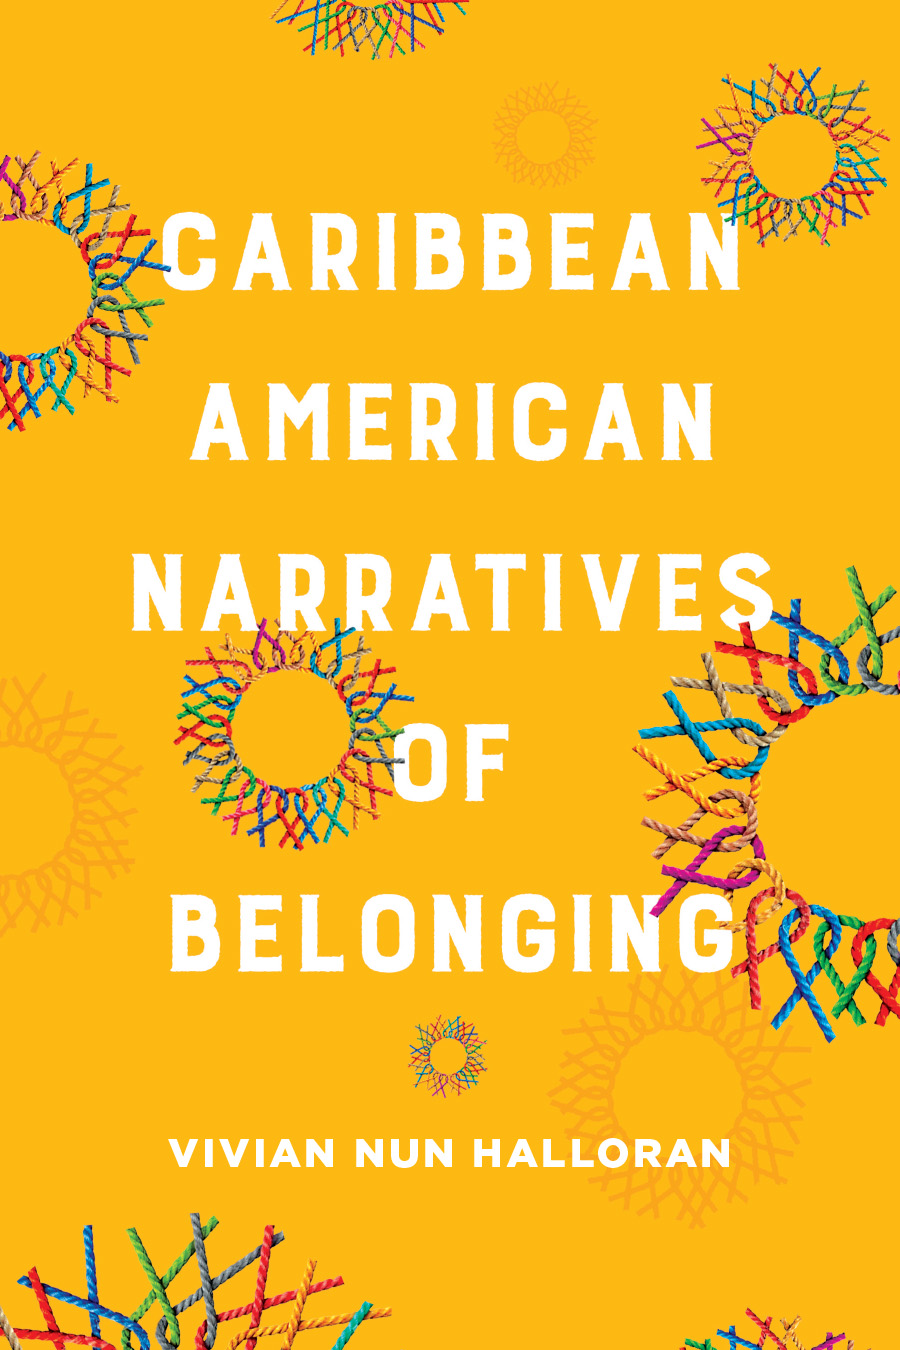 Front cover of Caribbean American Narratives of Belonging by Vivian Nun Halloran, featuring the book’s title set on a yellow background over interconnected, multicolored circles of knotted rope.